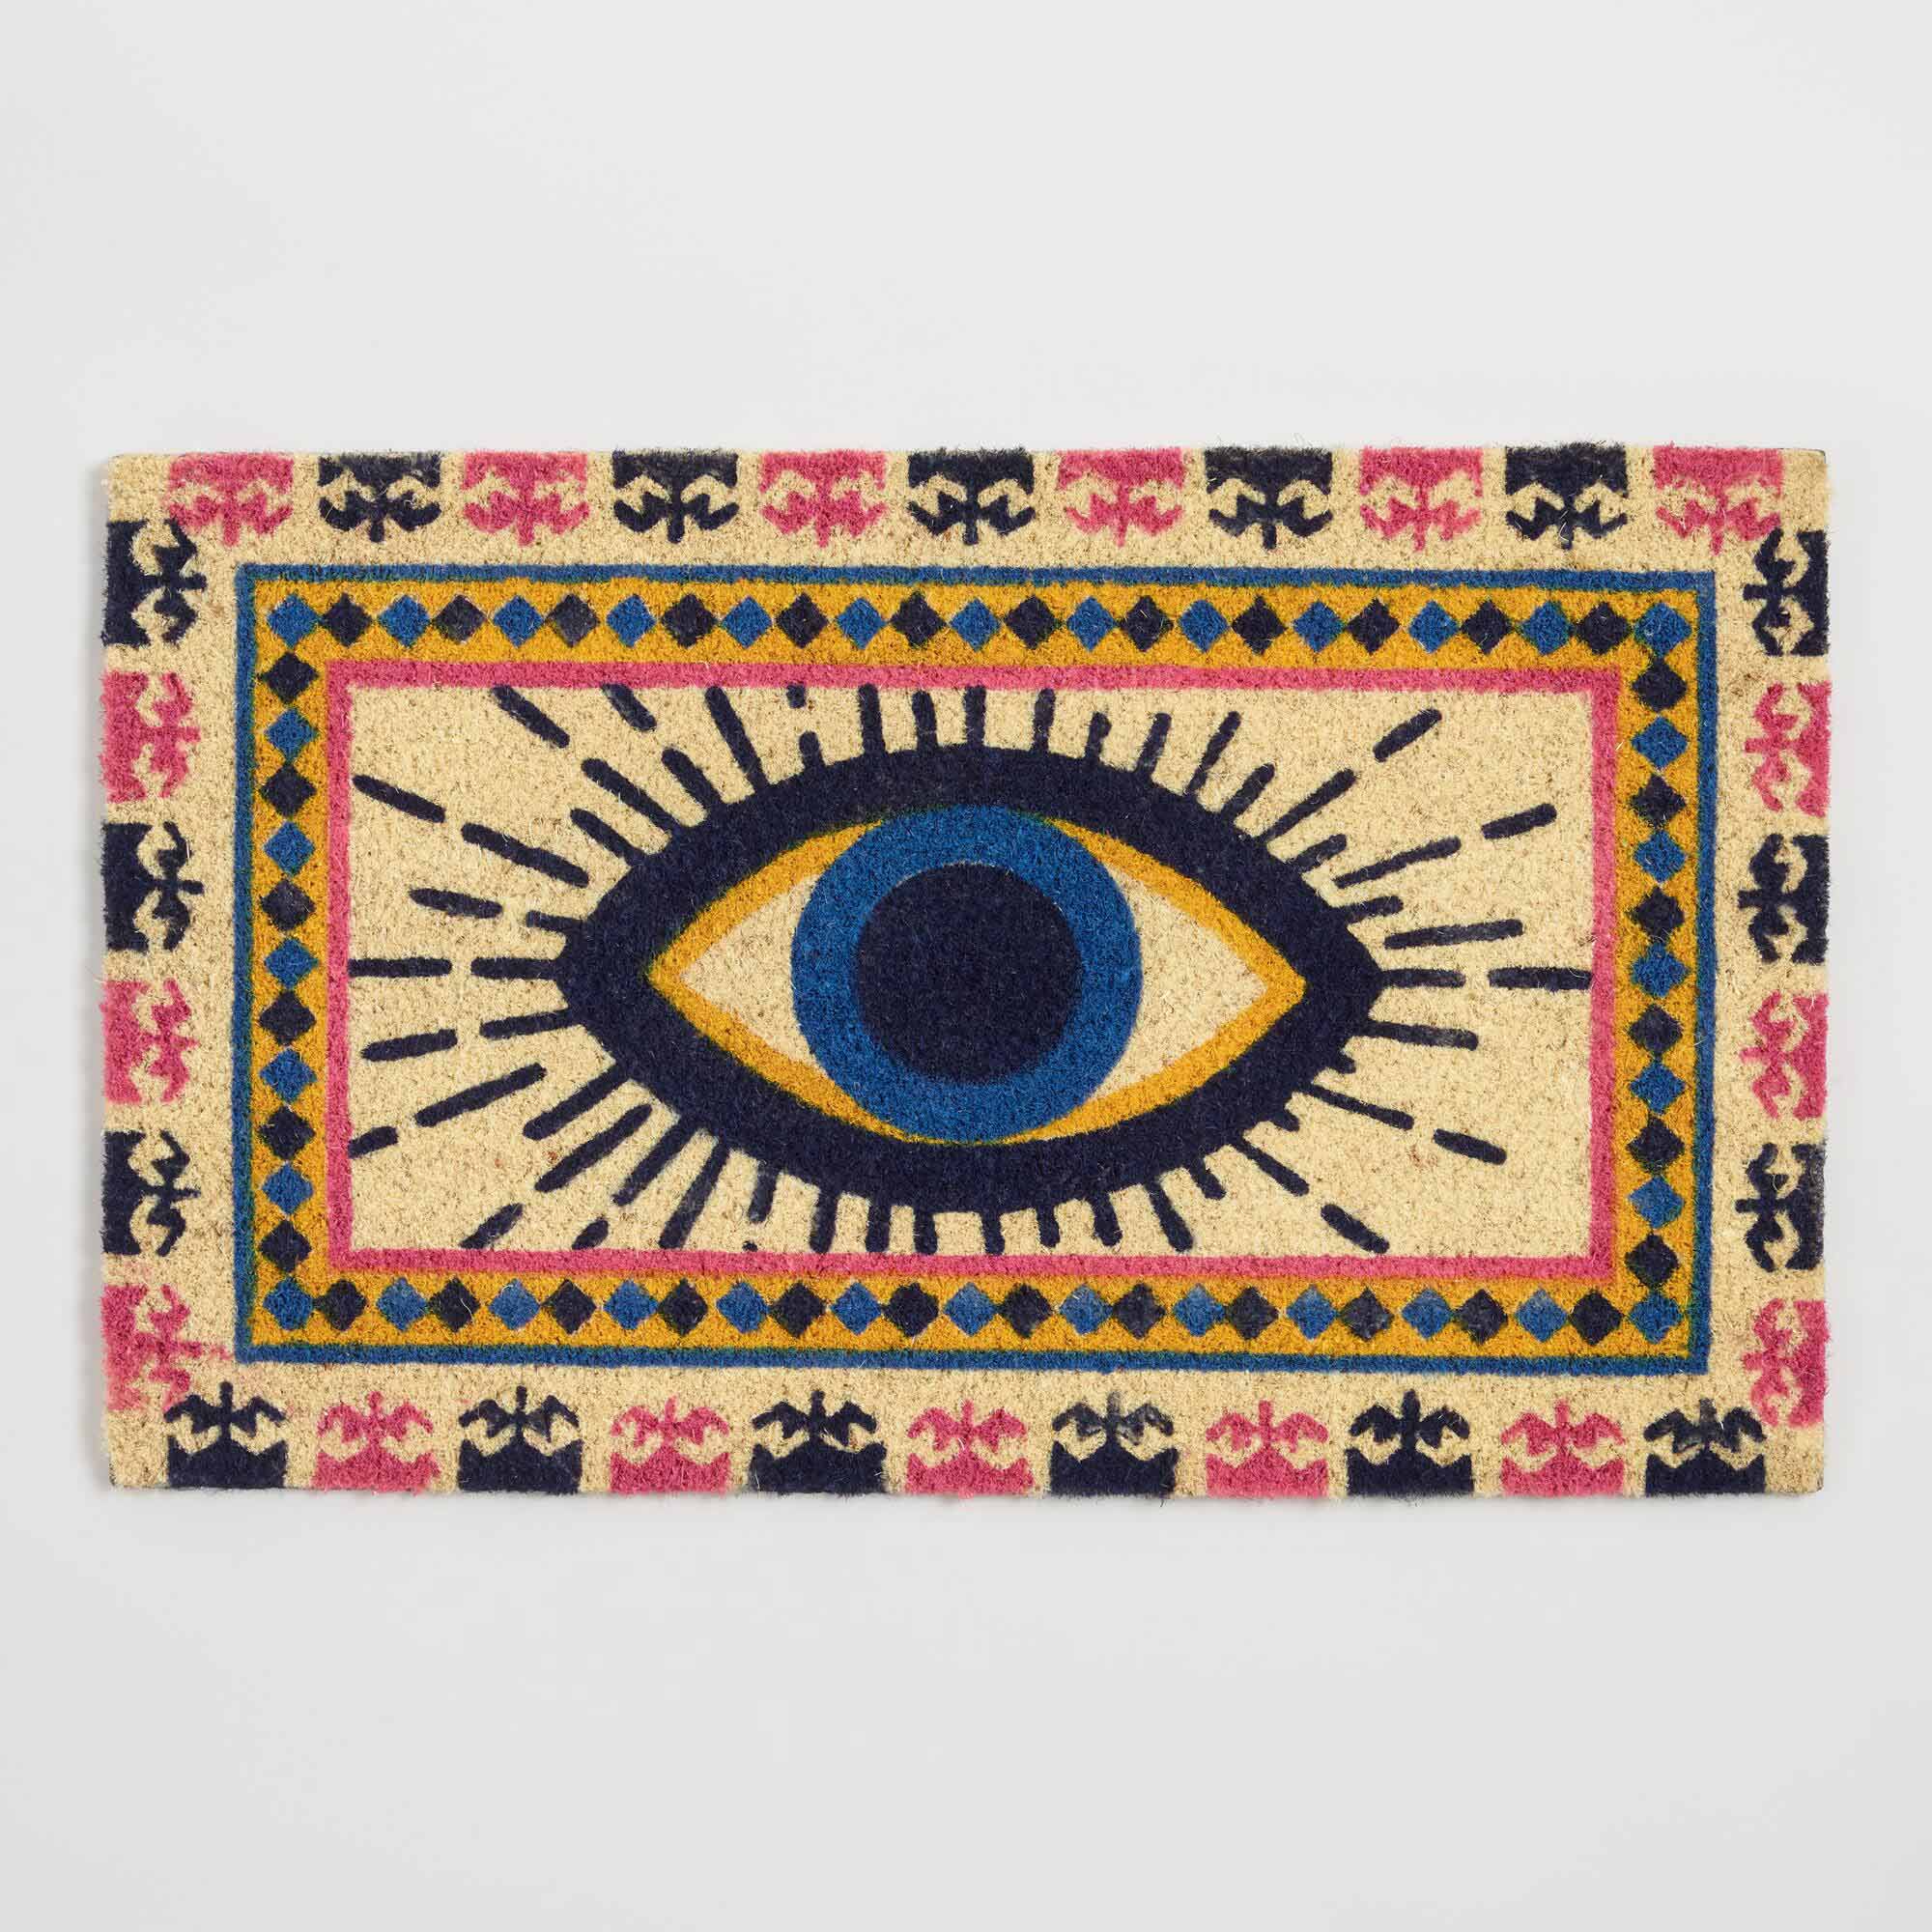 A doormat with a design showing a blue eye and repeating border pattern. 